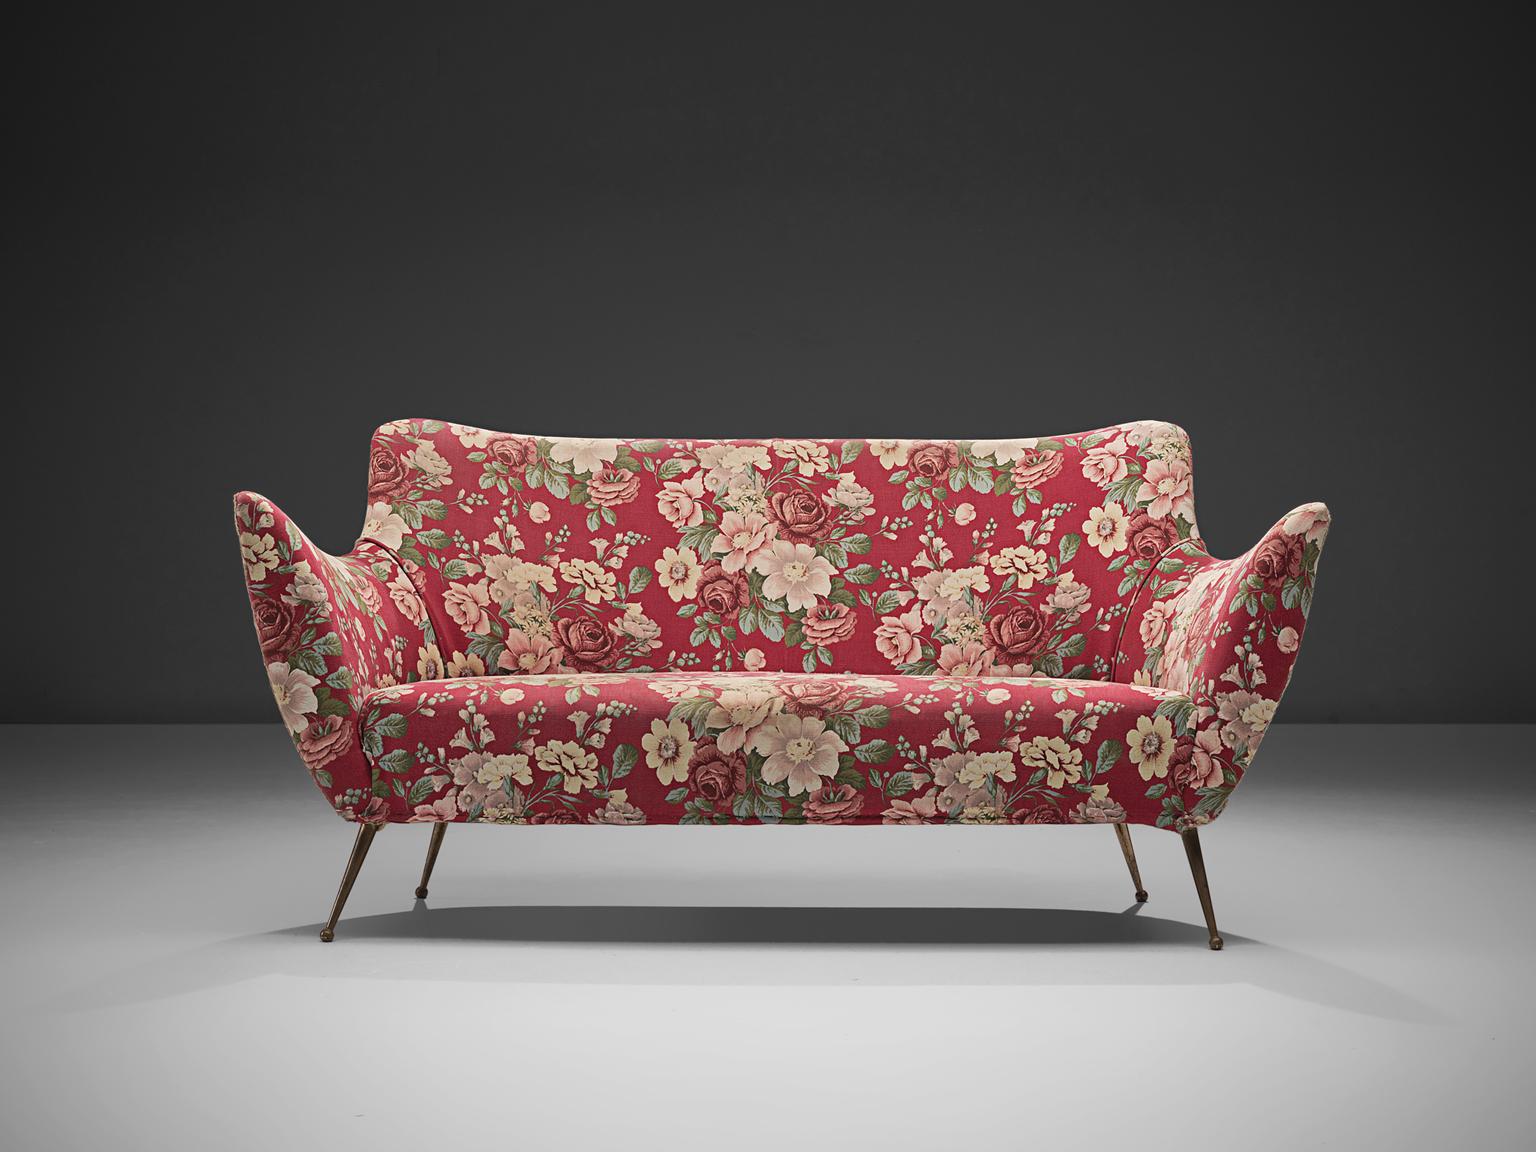 ISA Bergamo, pink red floral Italian sofa, Italy, 1950s.

This sofa is an iconic example of Italian design from the 1950s. Organic and sculptural, this two-seat sofa is anything but minimalistic. Equipped with the original stiletto brass feet